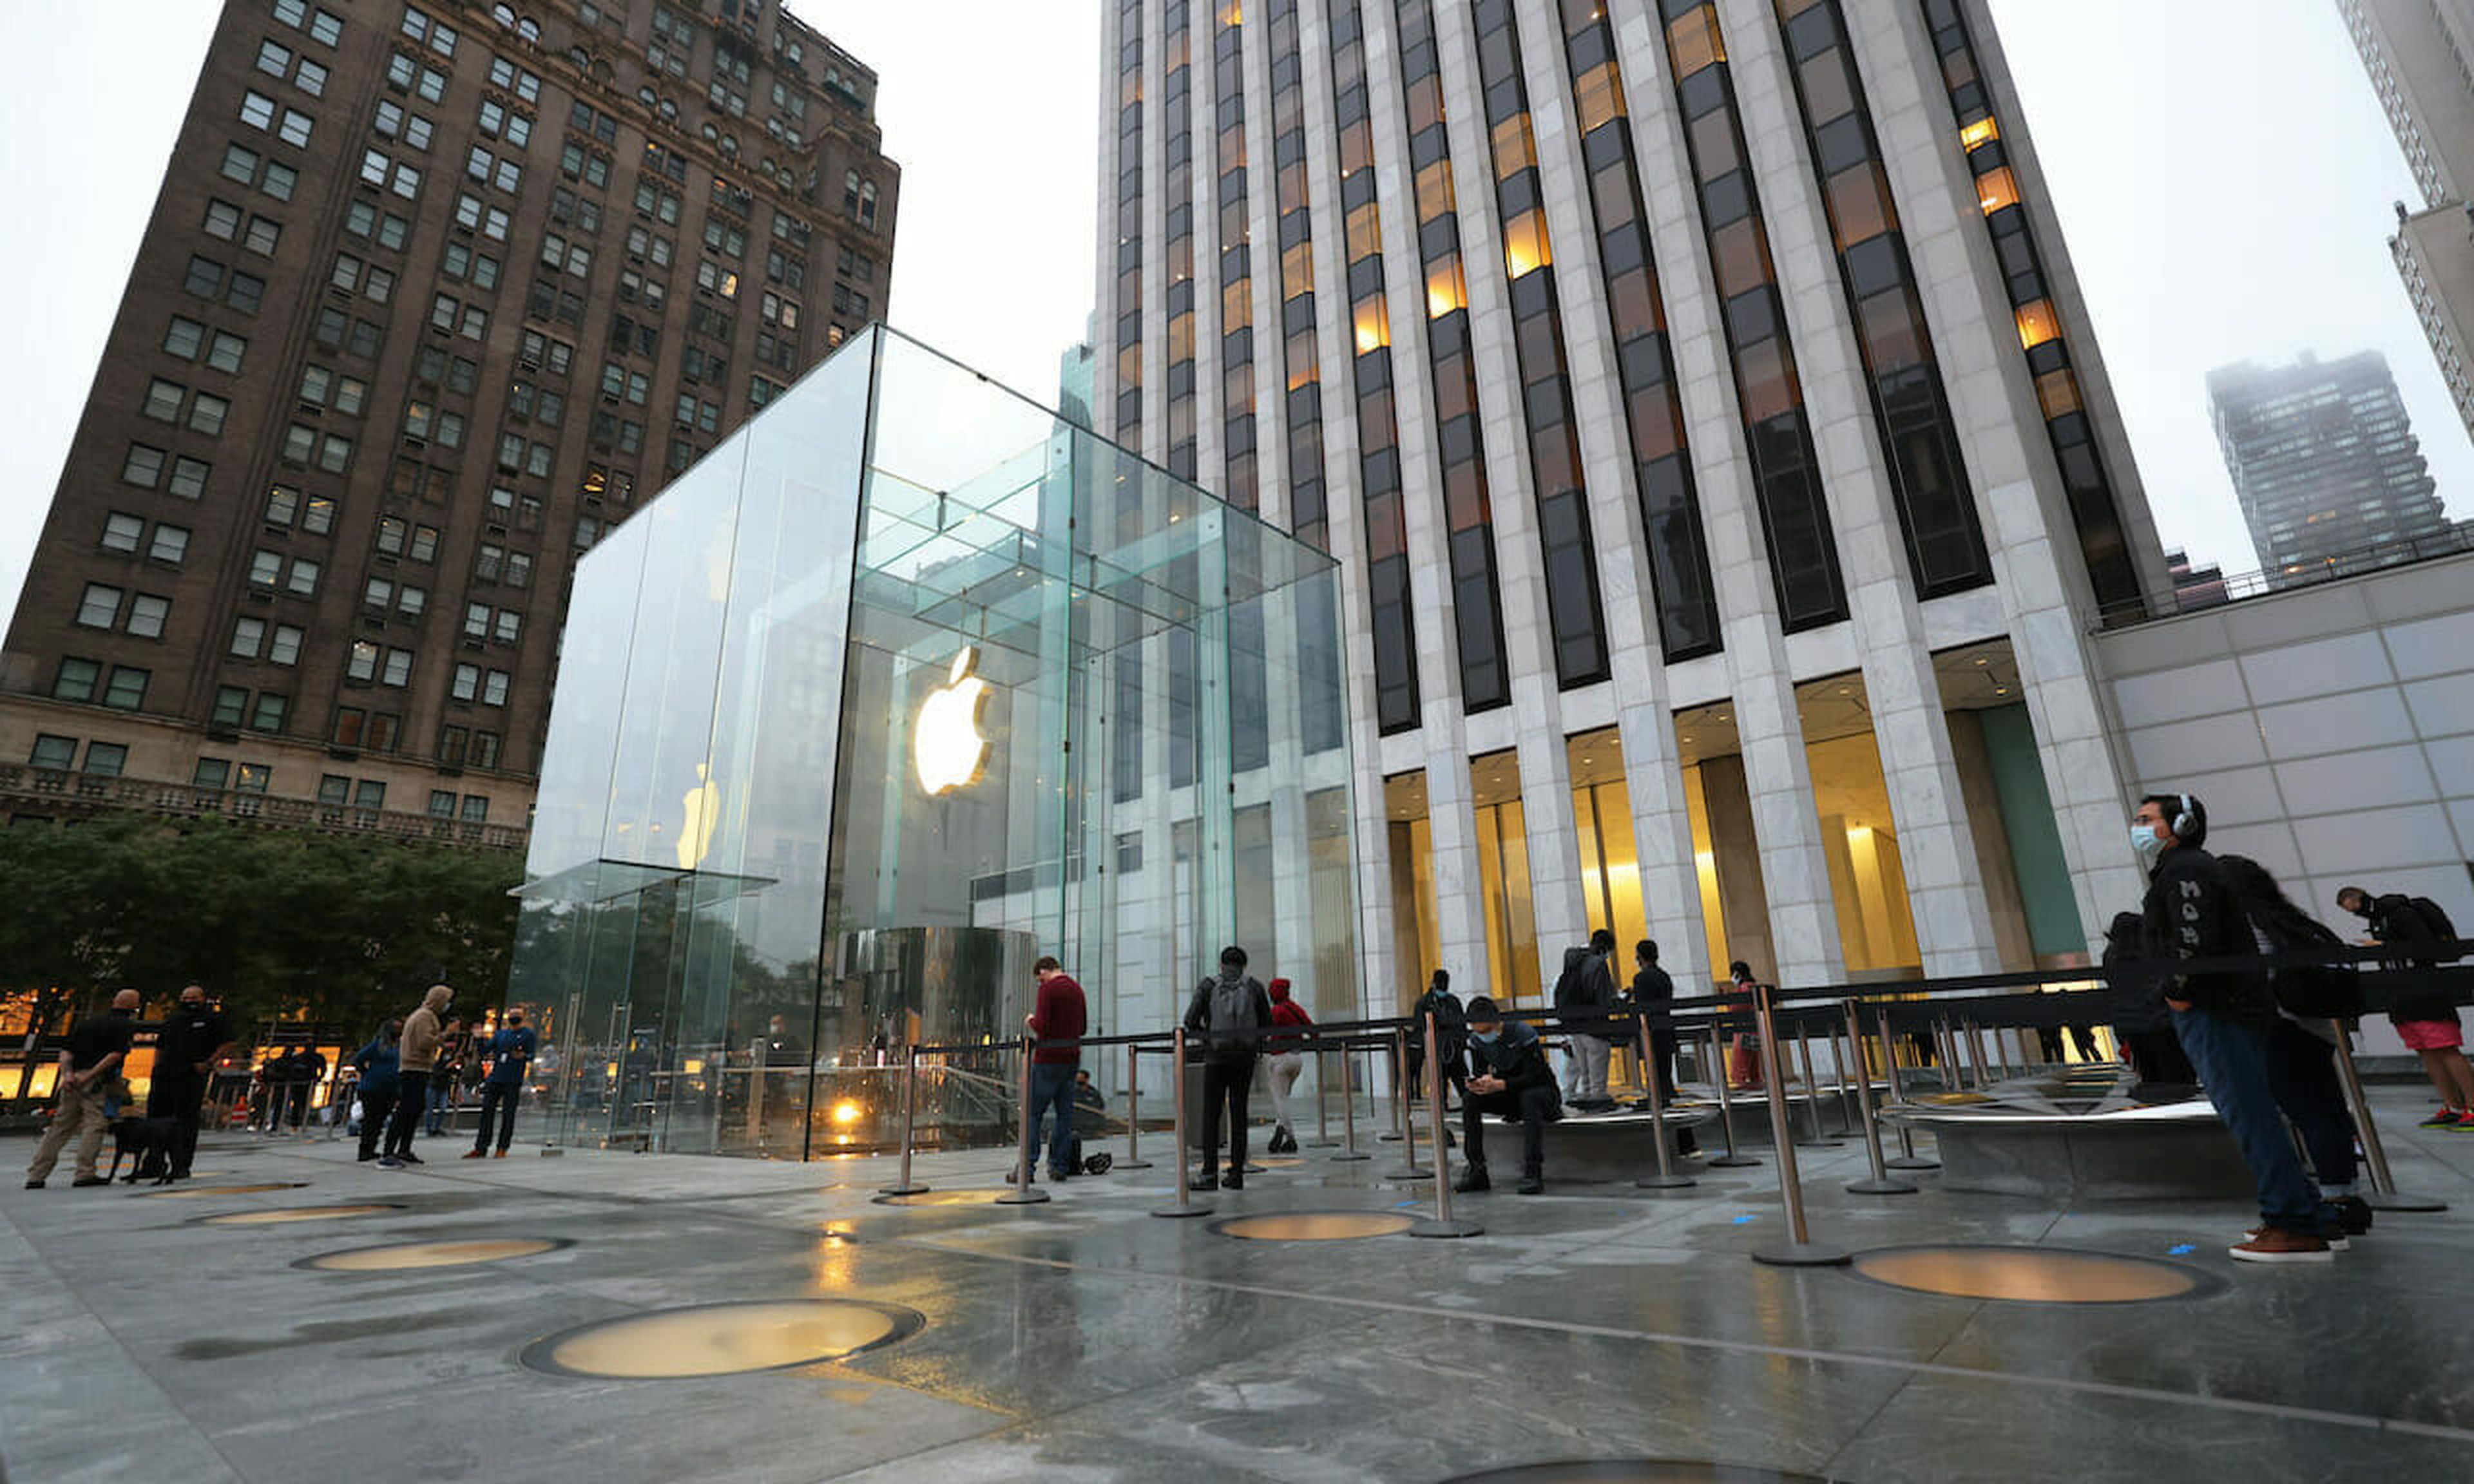 People wait in line at the Apple Fifth Avenue store for the release of the new iPhone on October 23, 2020 in New York City. The new Apple iPhone 12 was released today.  (Photo by Michael M. Santiago/Getty Images)